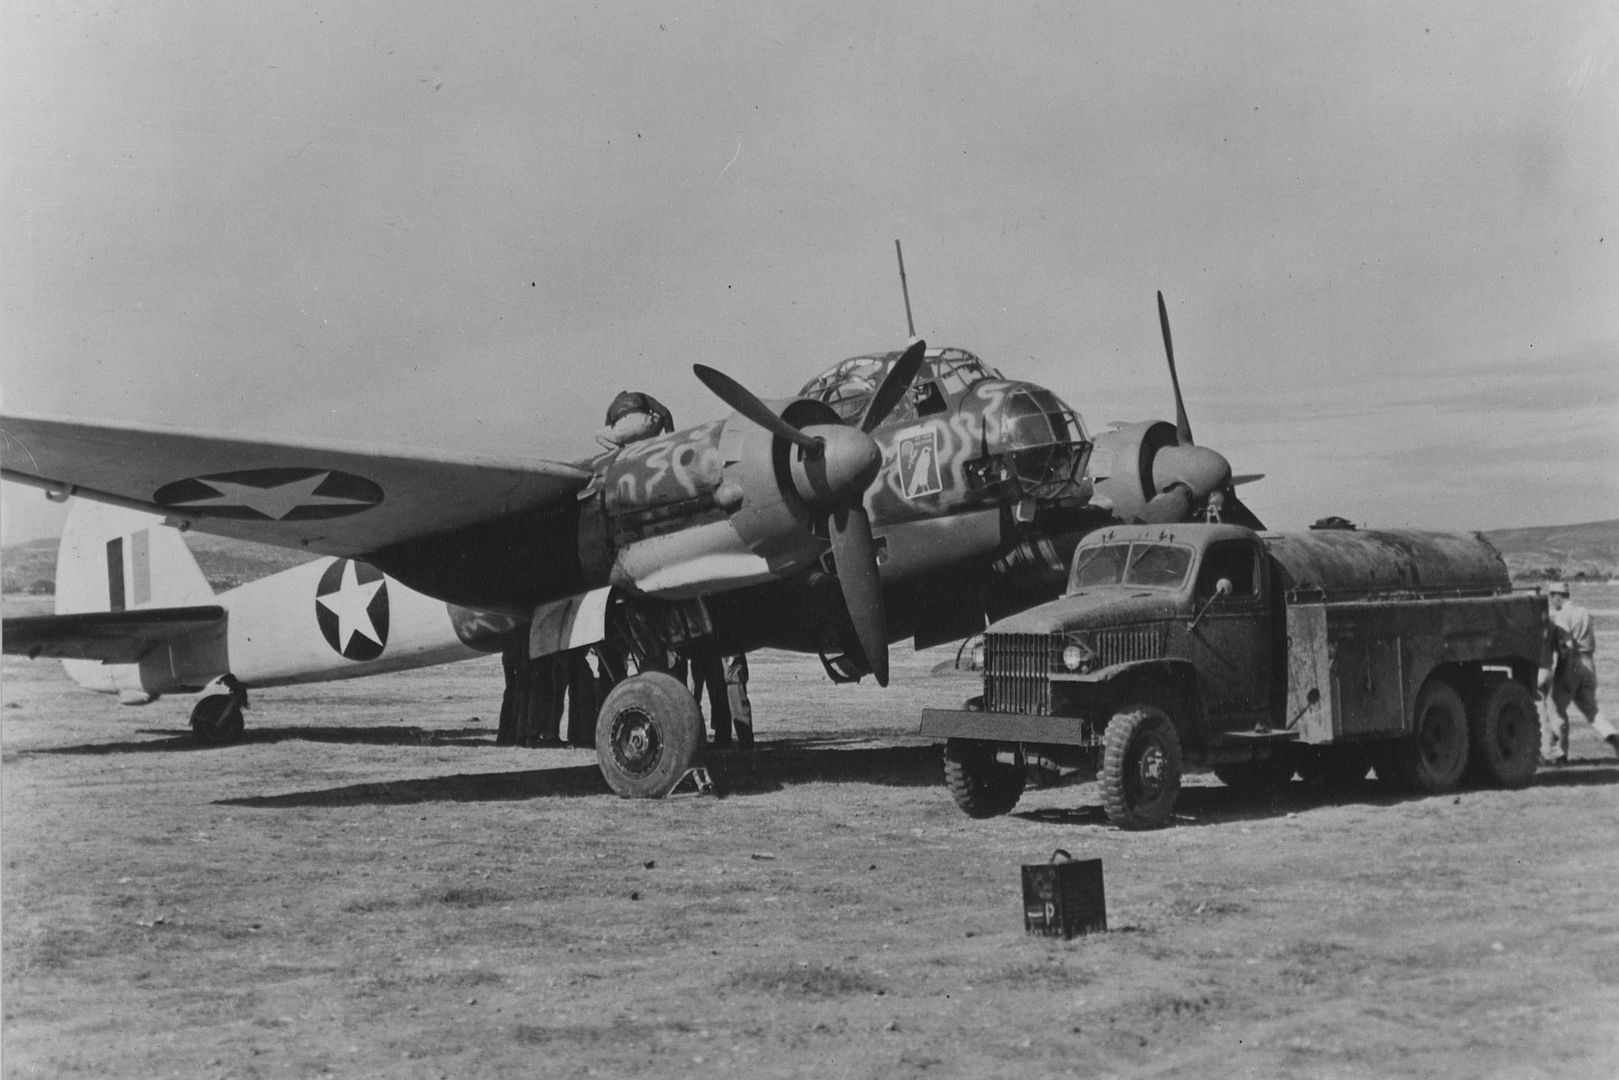  The Plane Was Left Virtually Undamaged On An Italian Airfield By The Retreating Germans